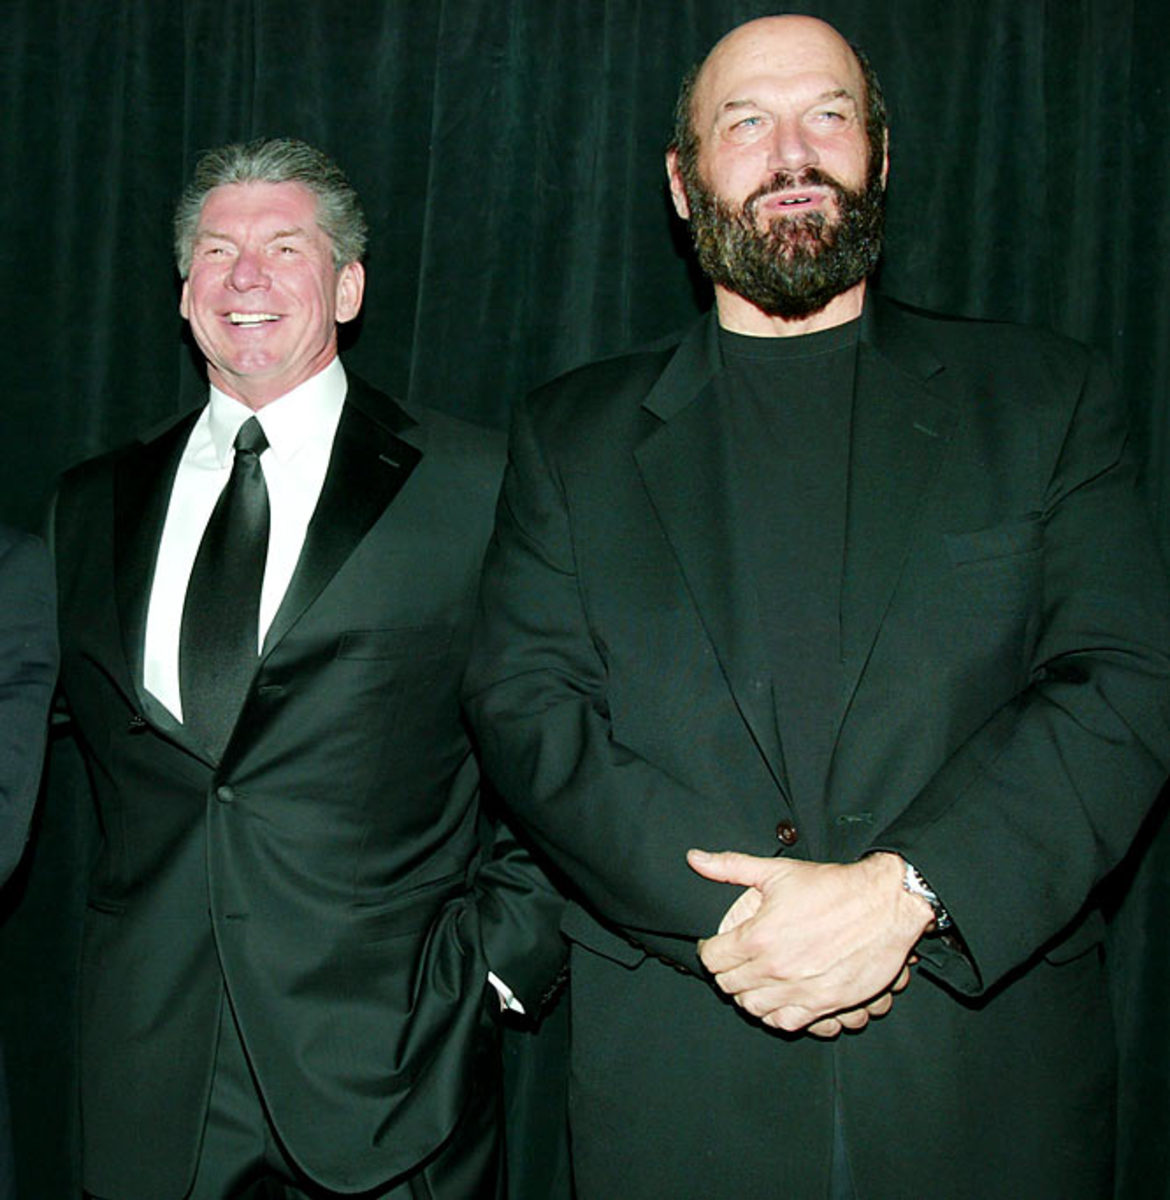 Vince McMahon and Jesse "The Body" Ventura 